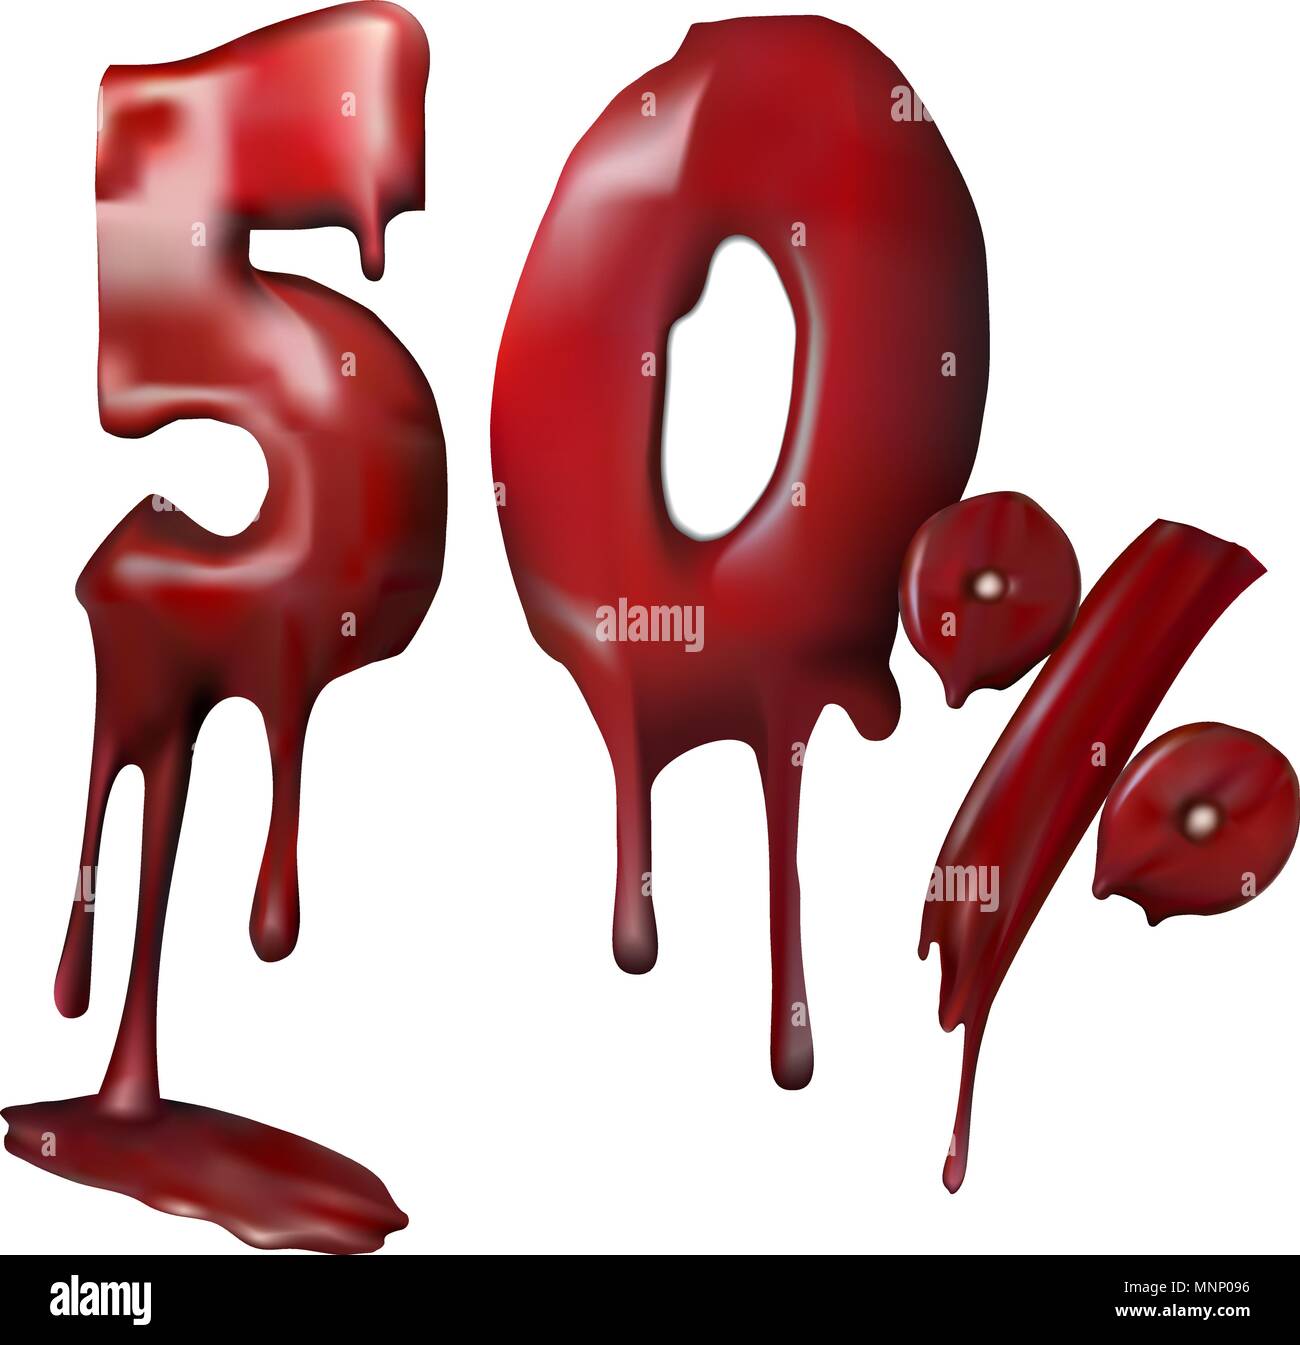 Illustration price 50 discount, melts. Stock Vector